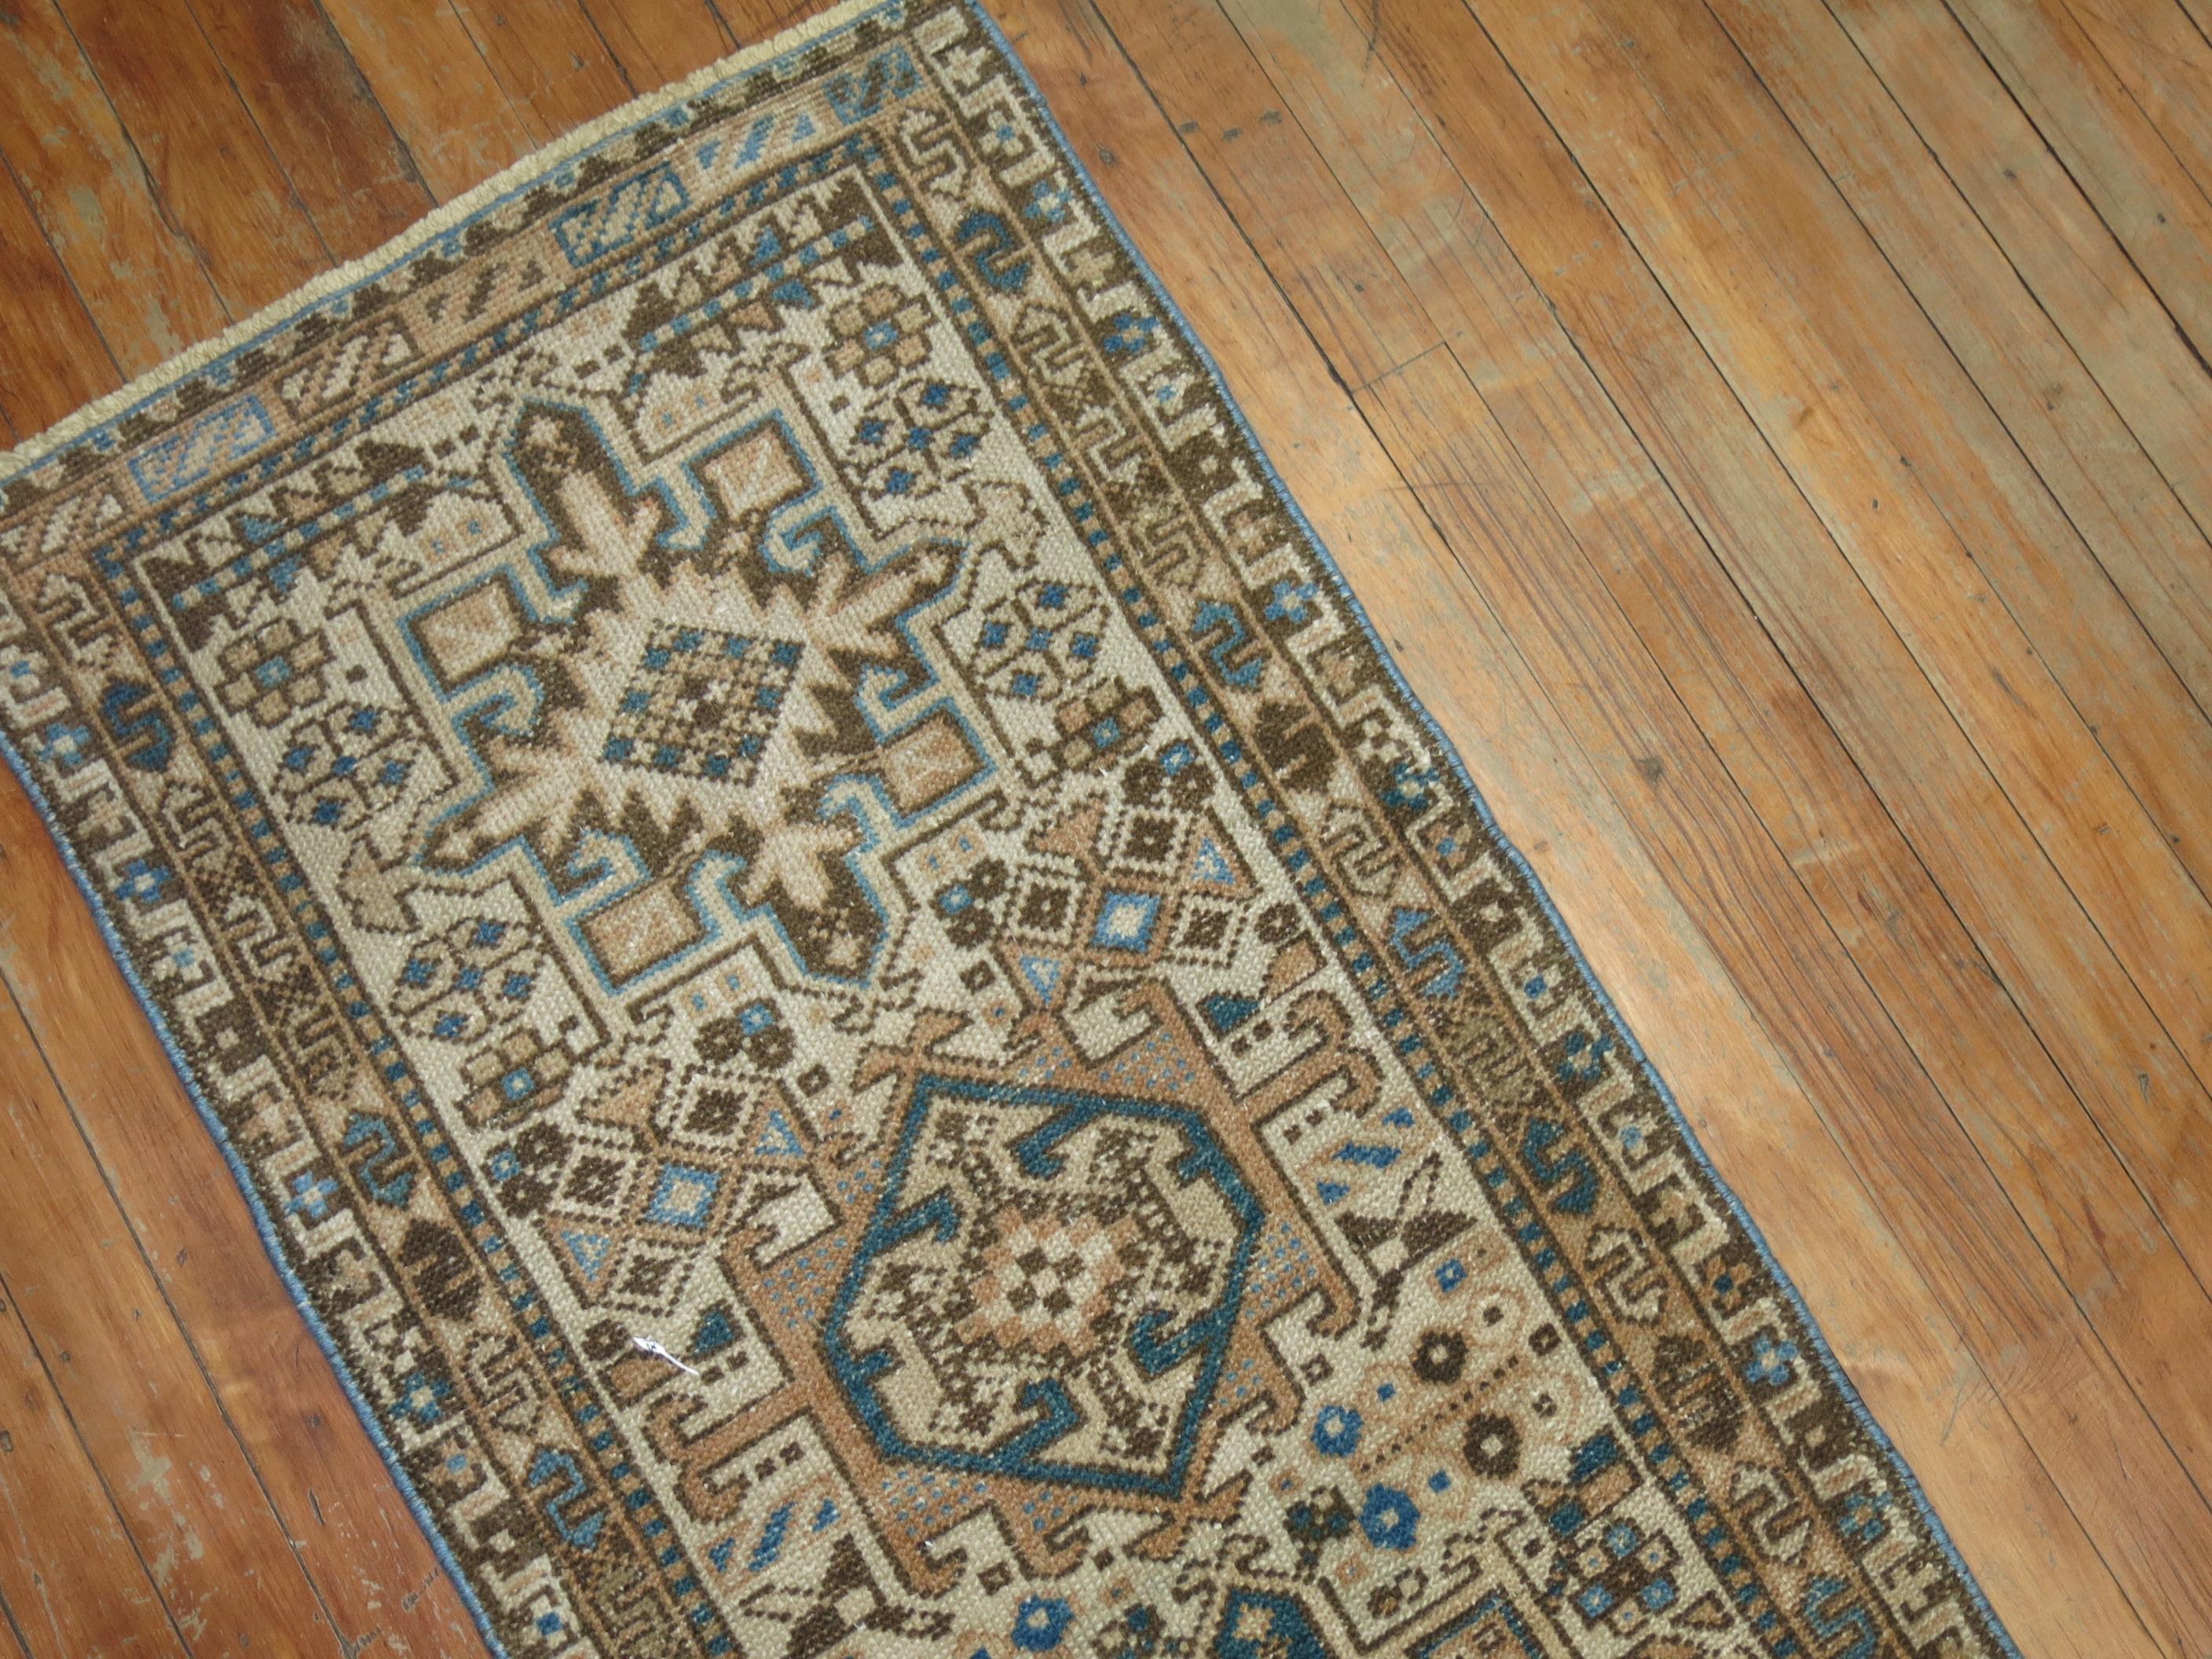 Very narrow one of a kind Persian Heriz runner from the second quarter of the 20th century. Blue, brown tones on an ivory ground. The size is original,

circa 1940s, measures: 1'11